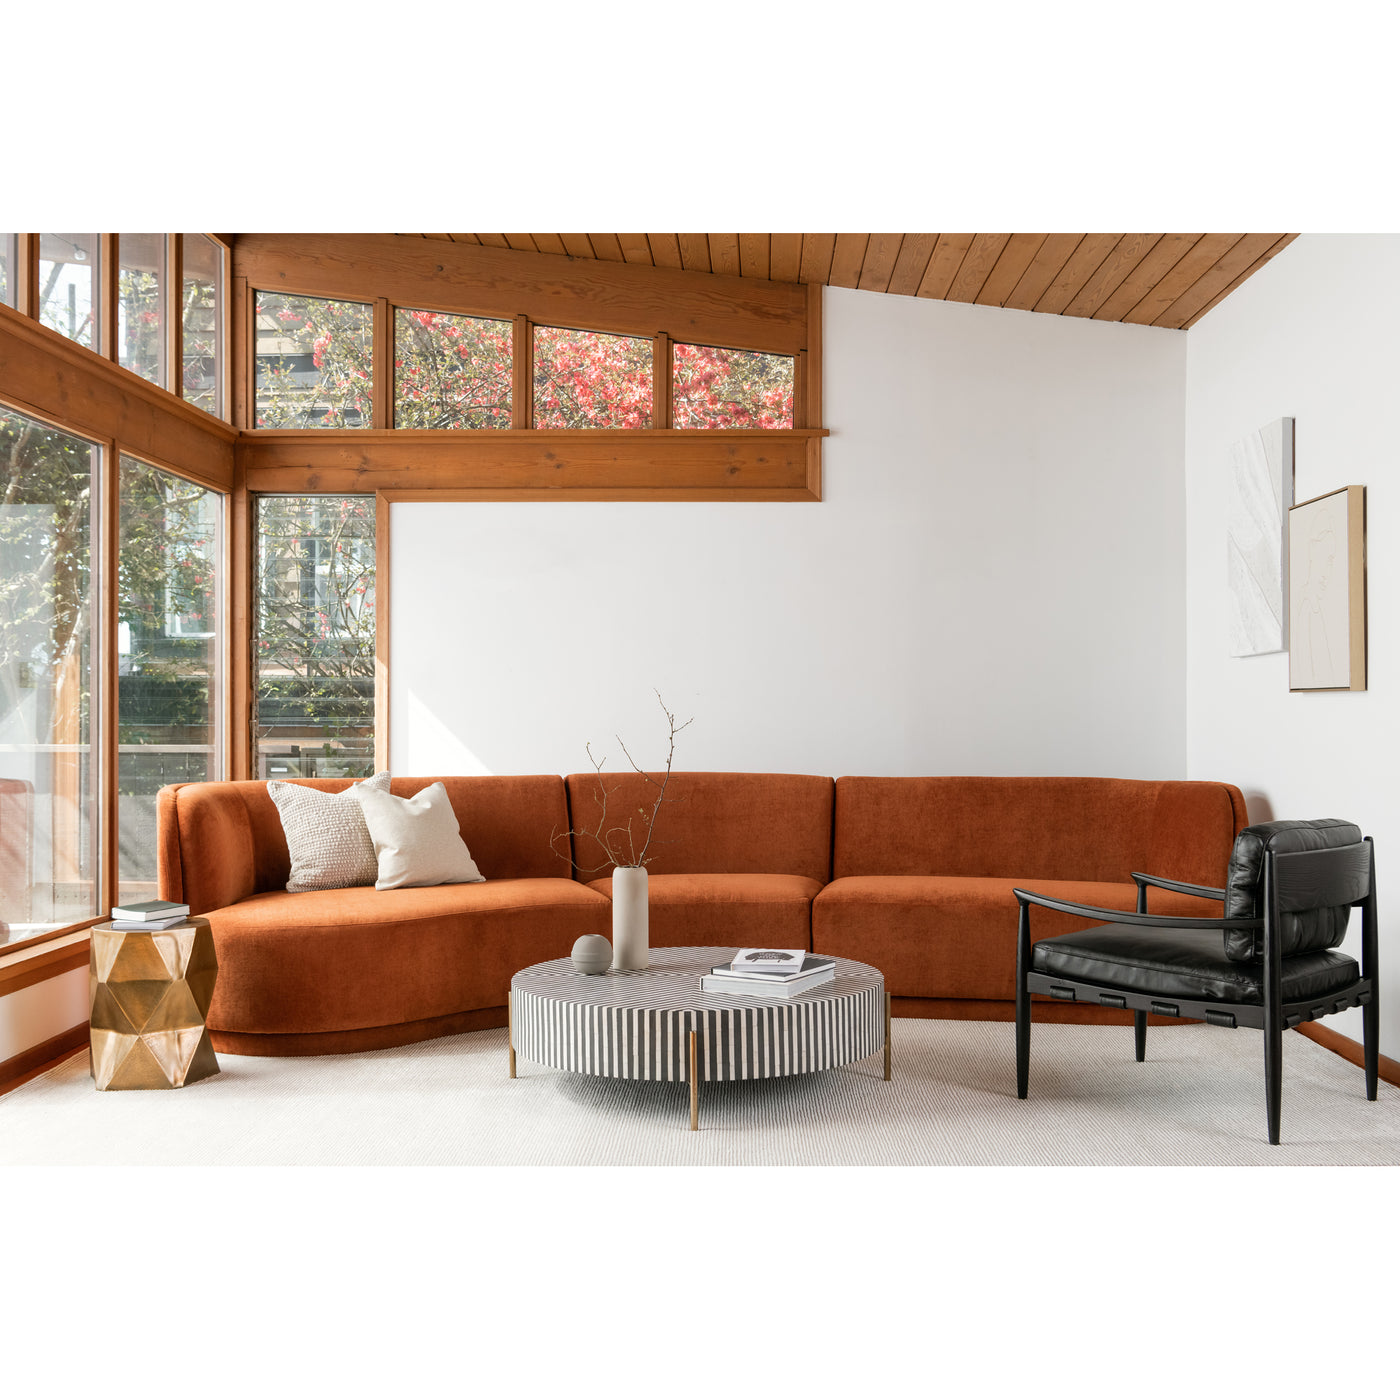 Darling, you're different, and we love it! A keen scene space-wise, this dreamy modular sofa is just as unique as you are....